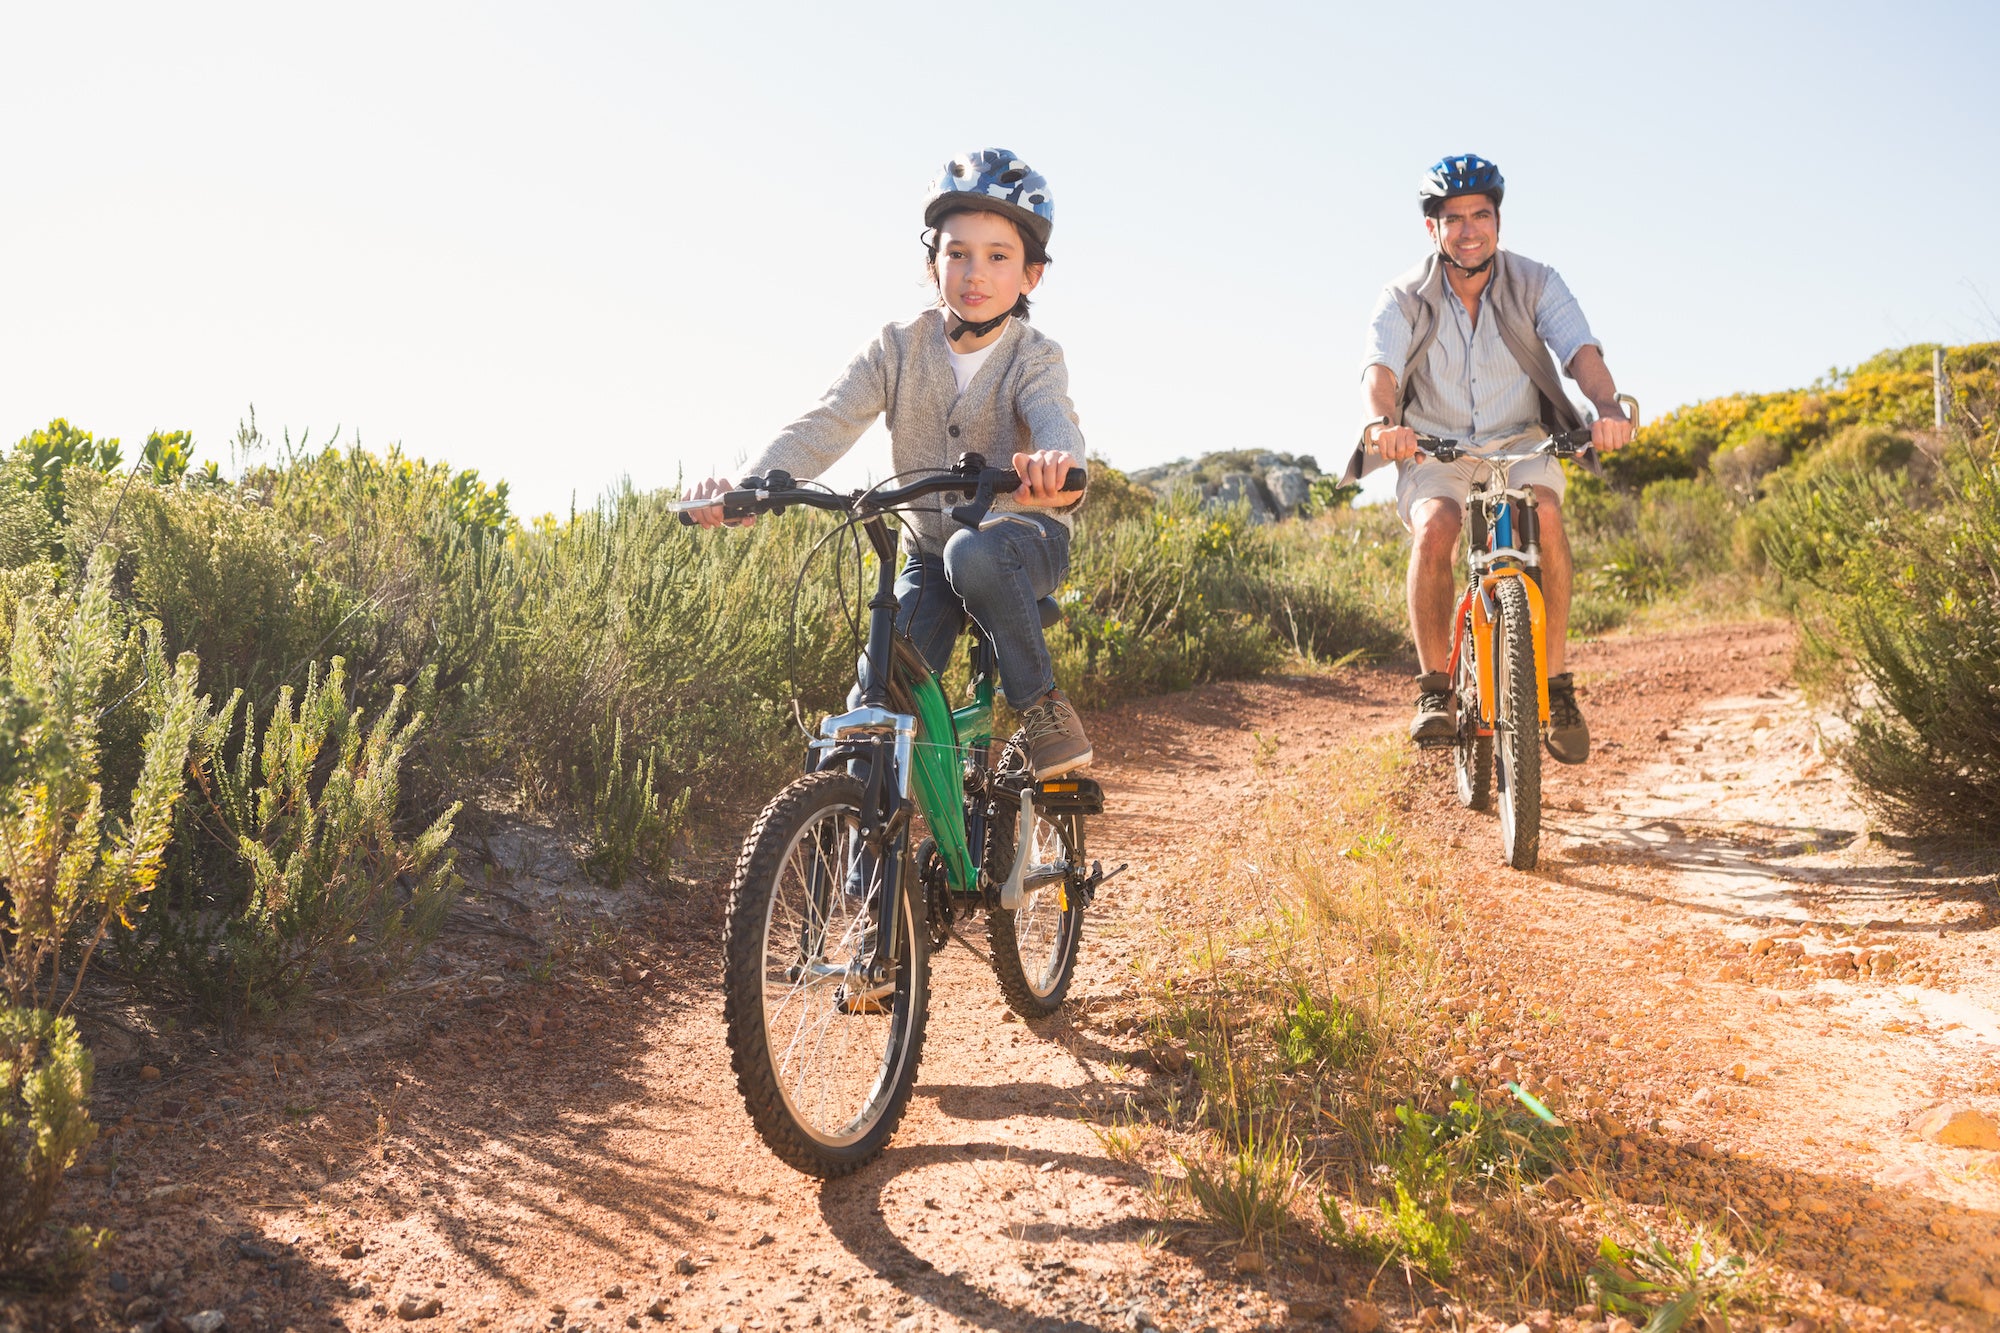 Kids’ Bike Sizing Chart: Find The Best Child Bicycle By Height, Weight & Age